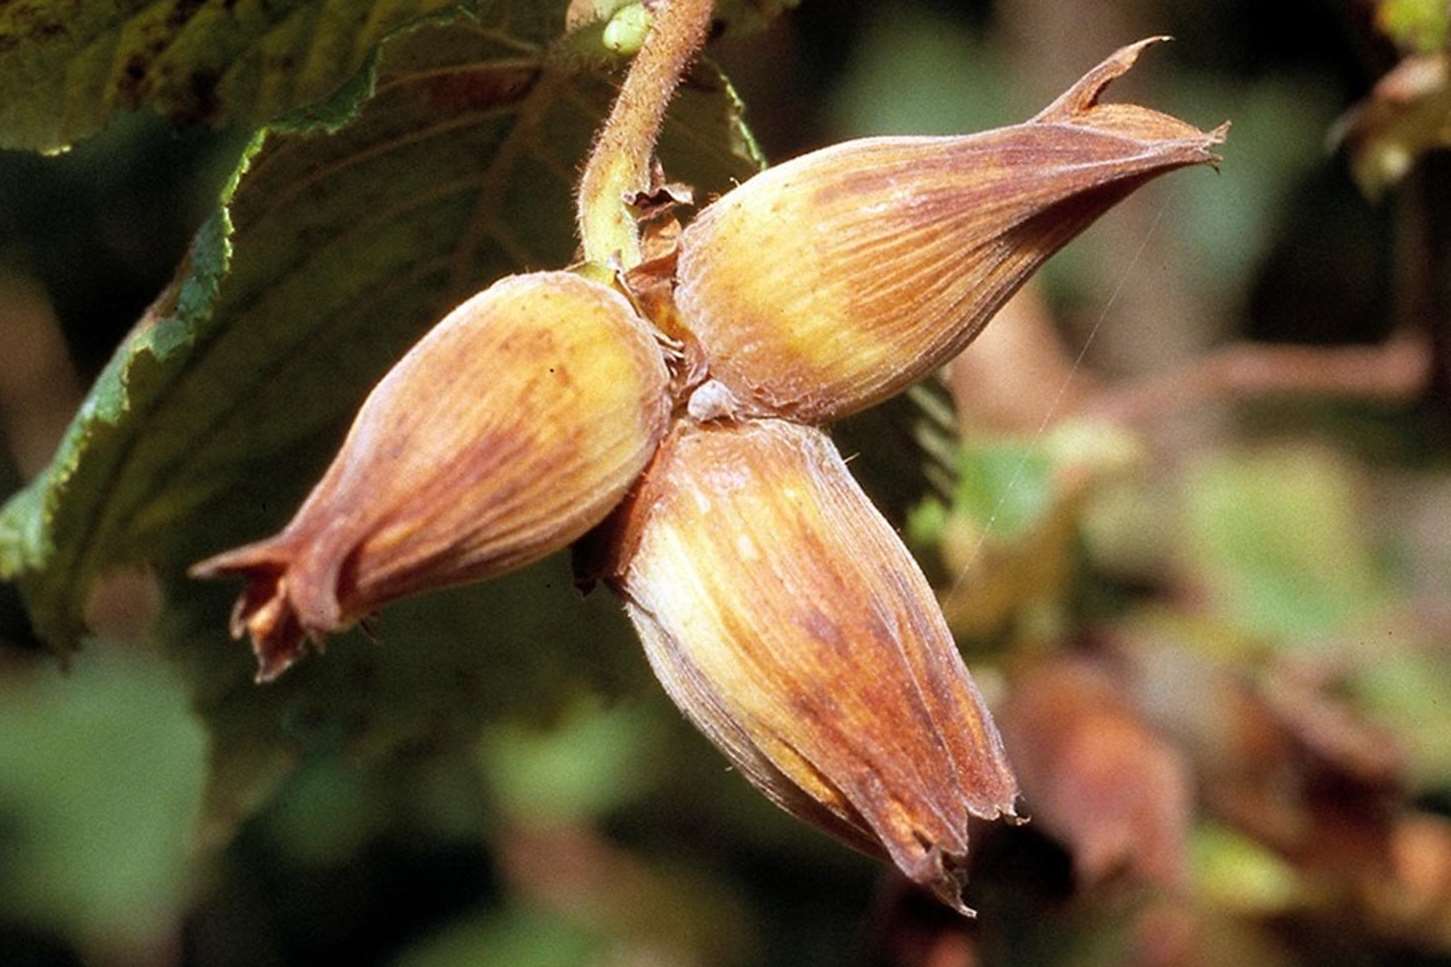 It is expected to be a record year for Kentish cobnuts